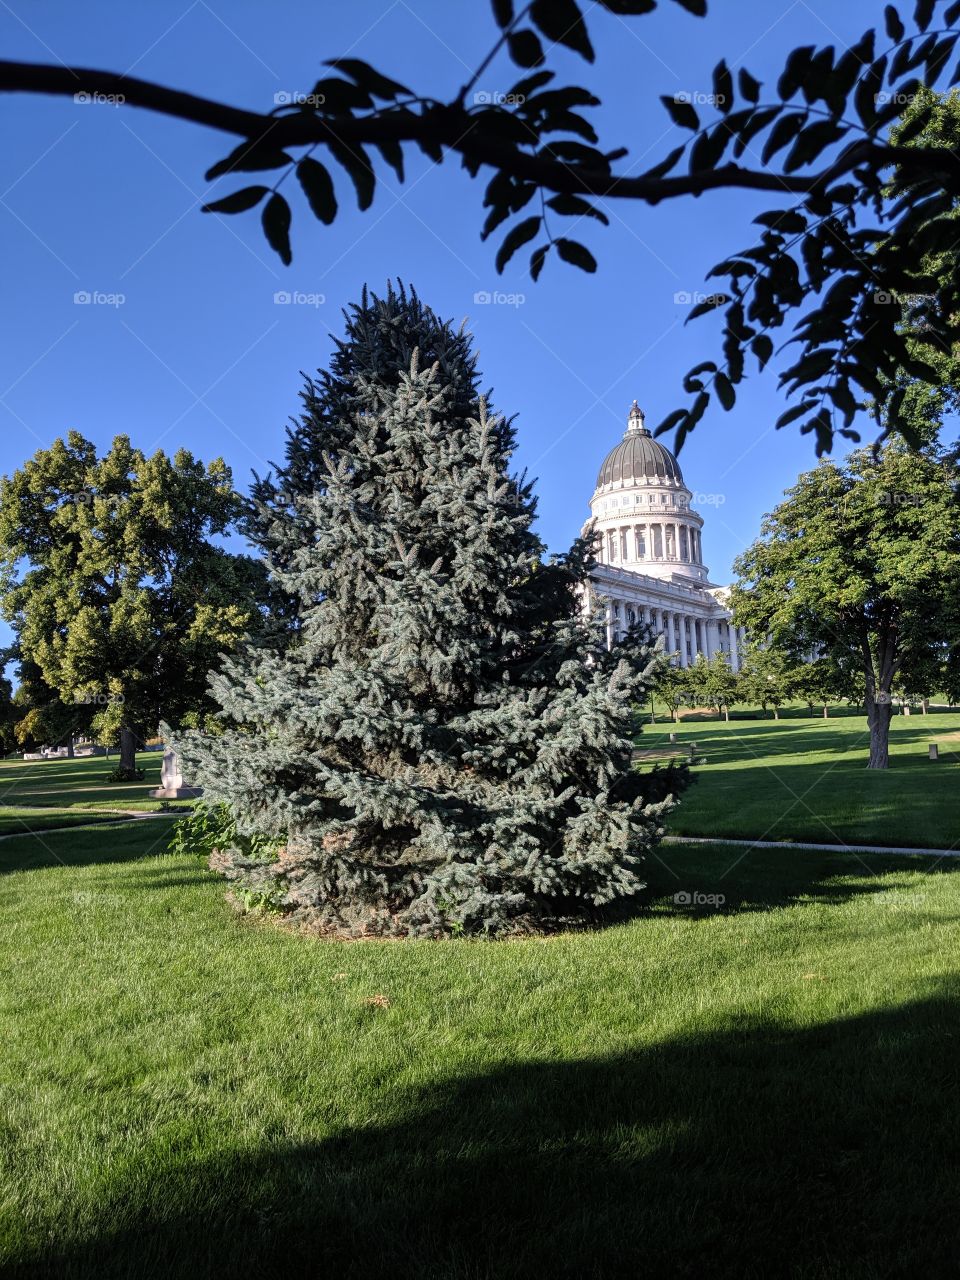 A single, happy, alone evergreen tree on the lawn of the city capital. Surrounded by beautiful green grass and blue sky, it holds it's ground well.